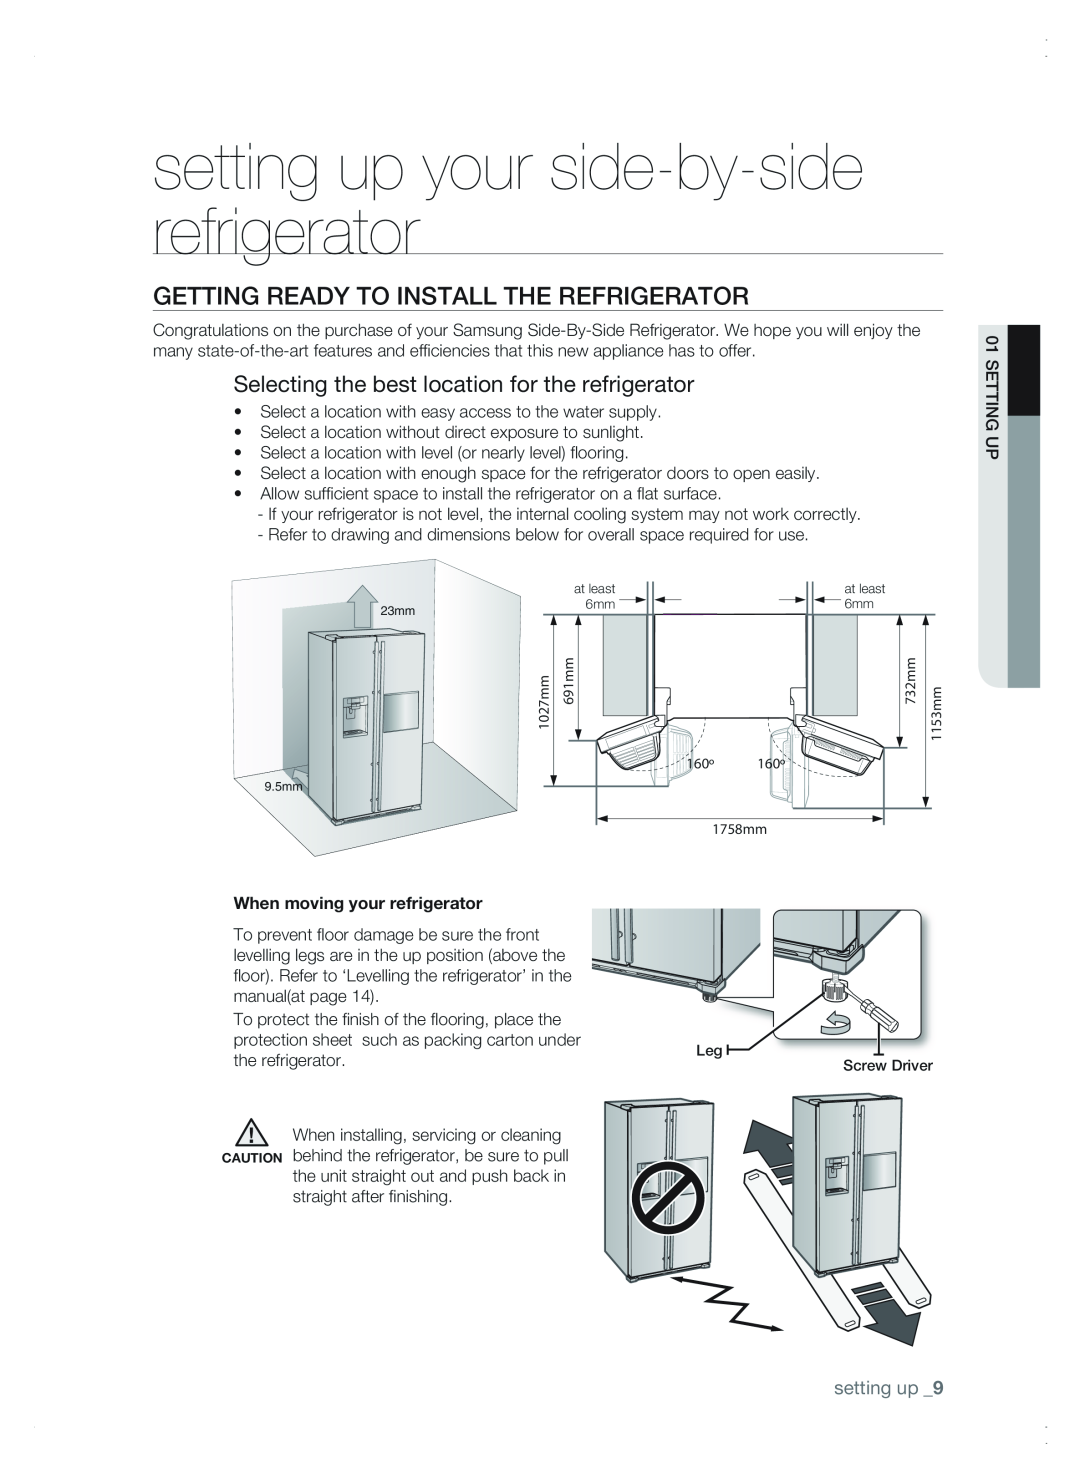 Samsung RSG5 user manual setting up your side-by-side refrigerator, Getting ready to install the refrigerator, setting up  